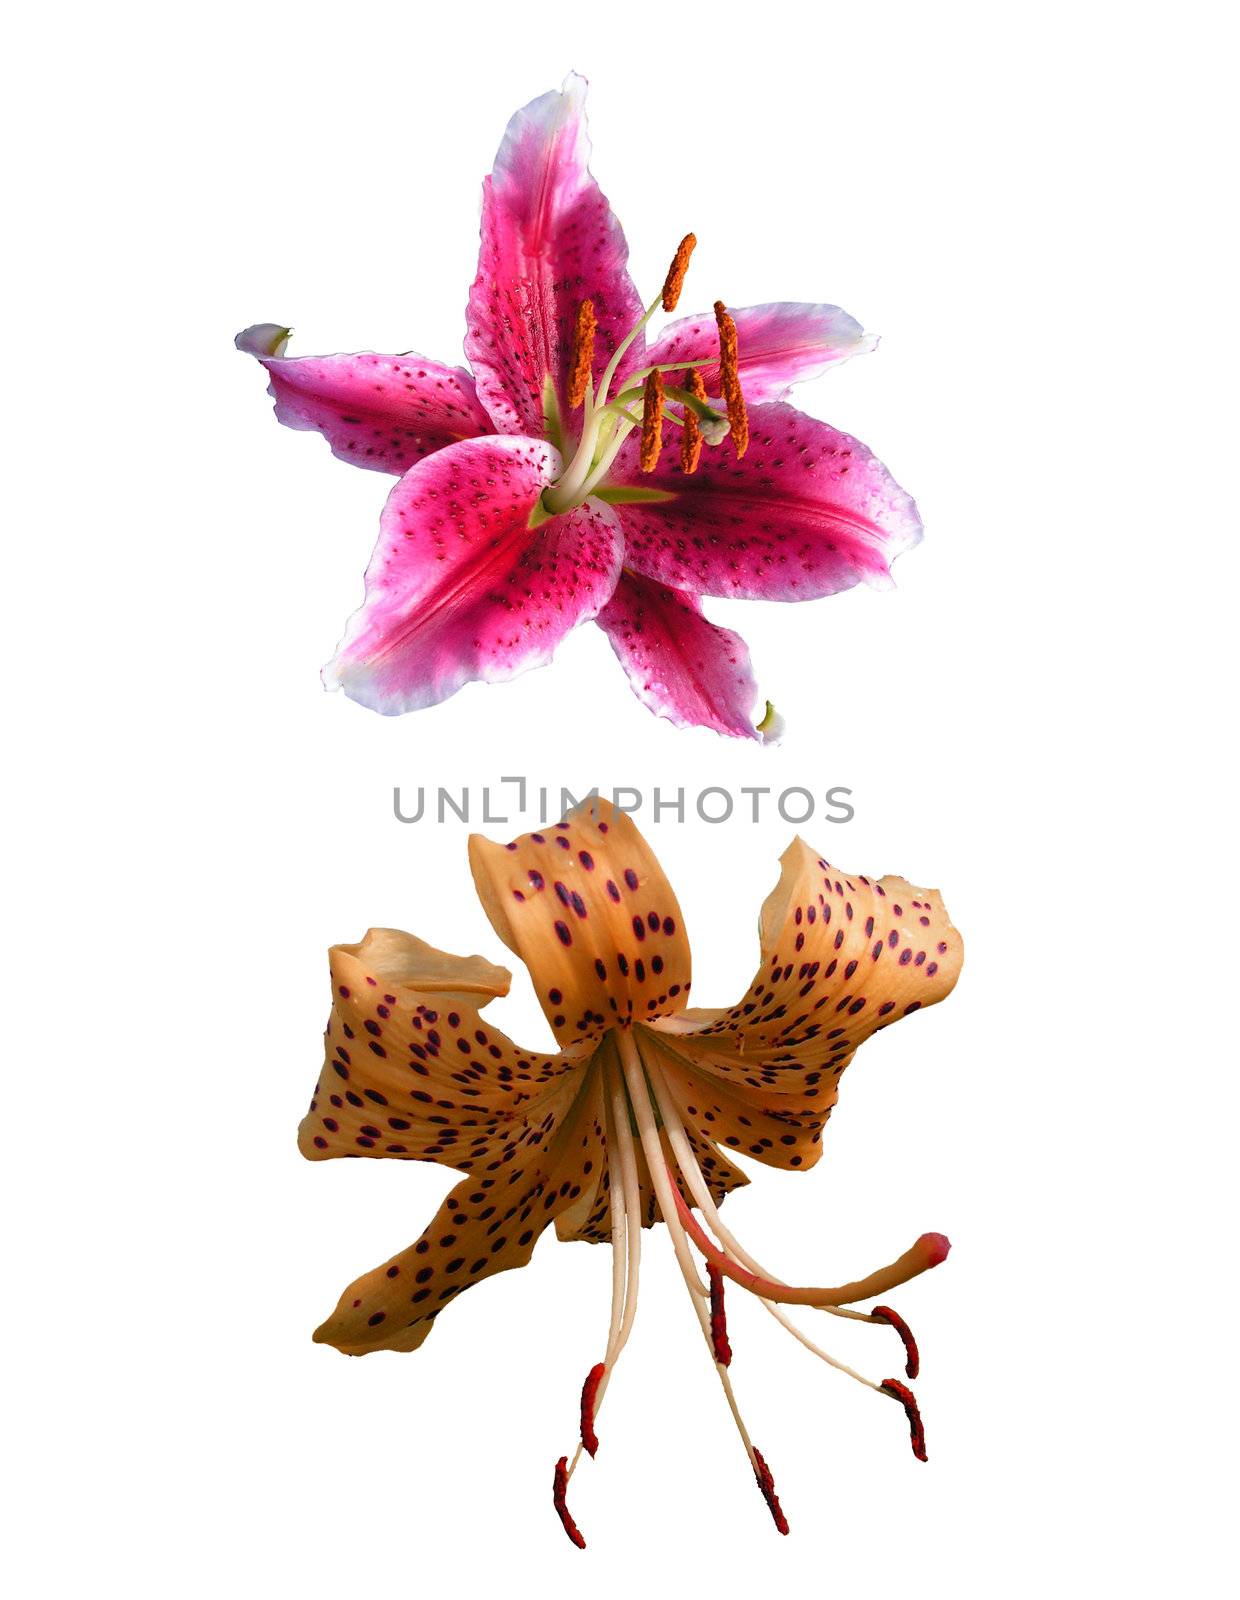 The image of two isolated lilies of different grades